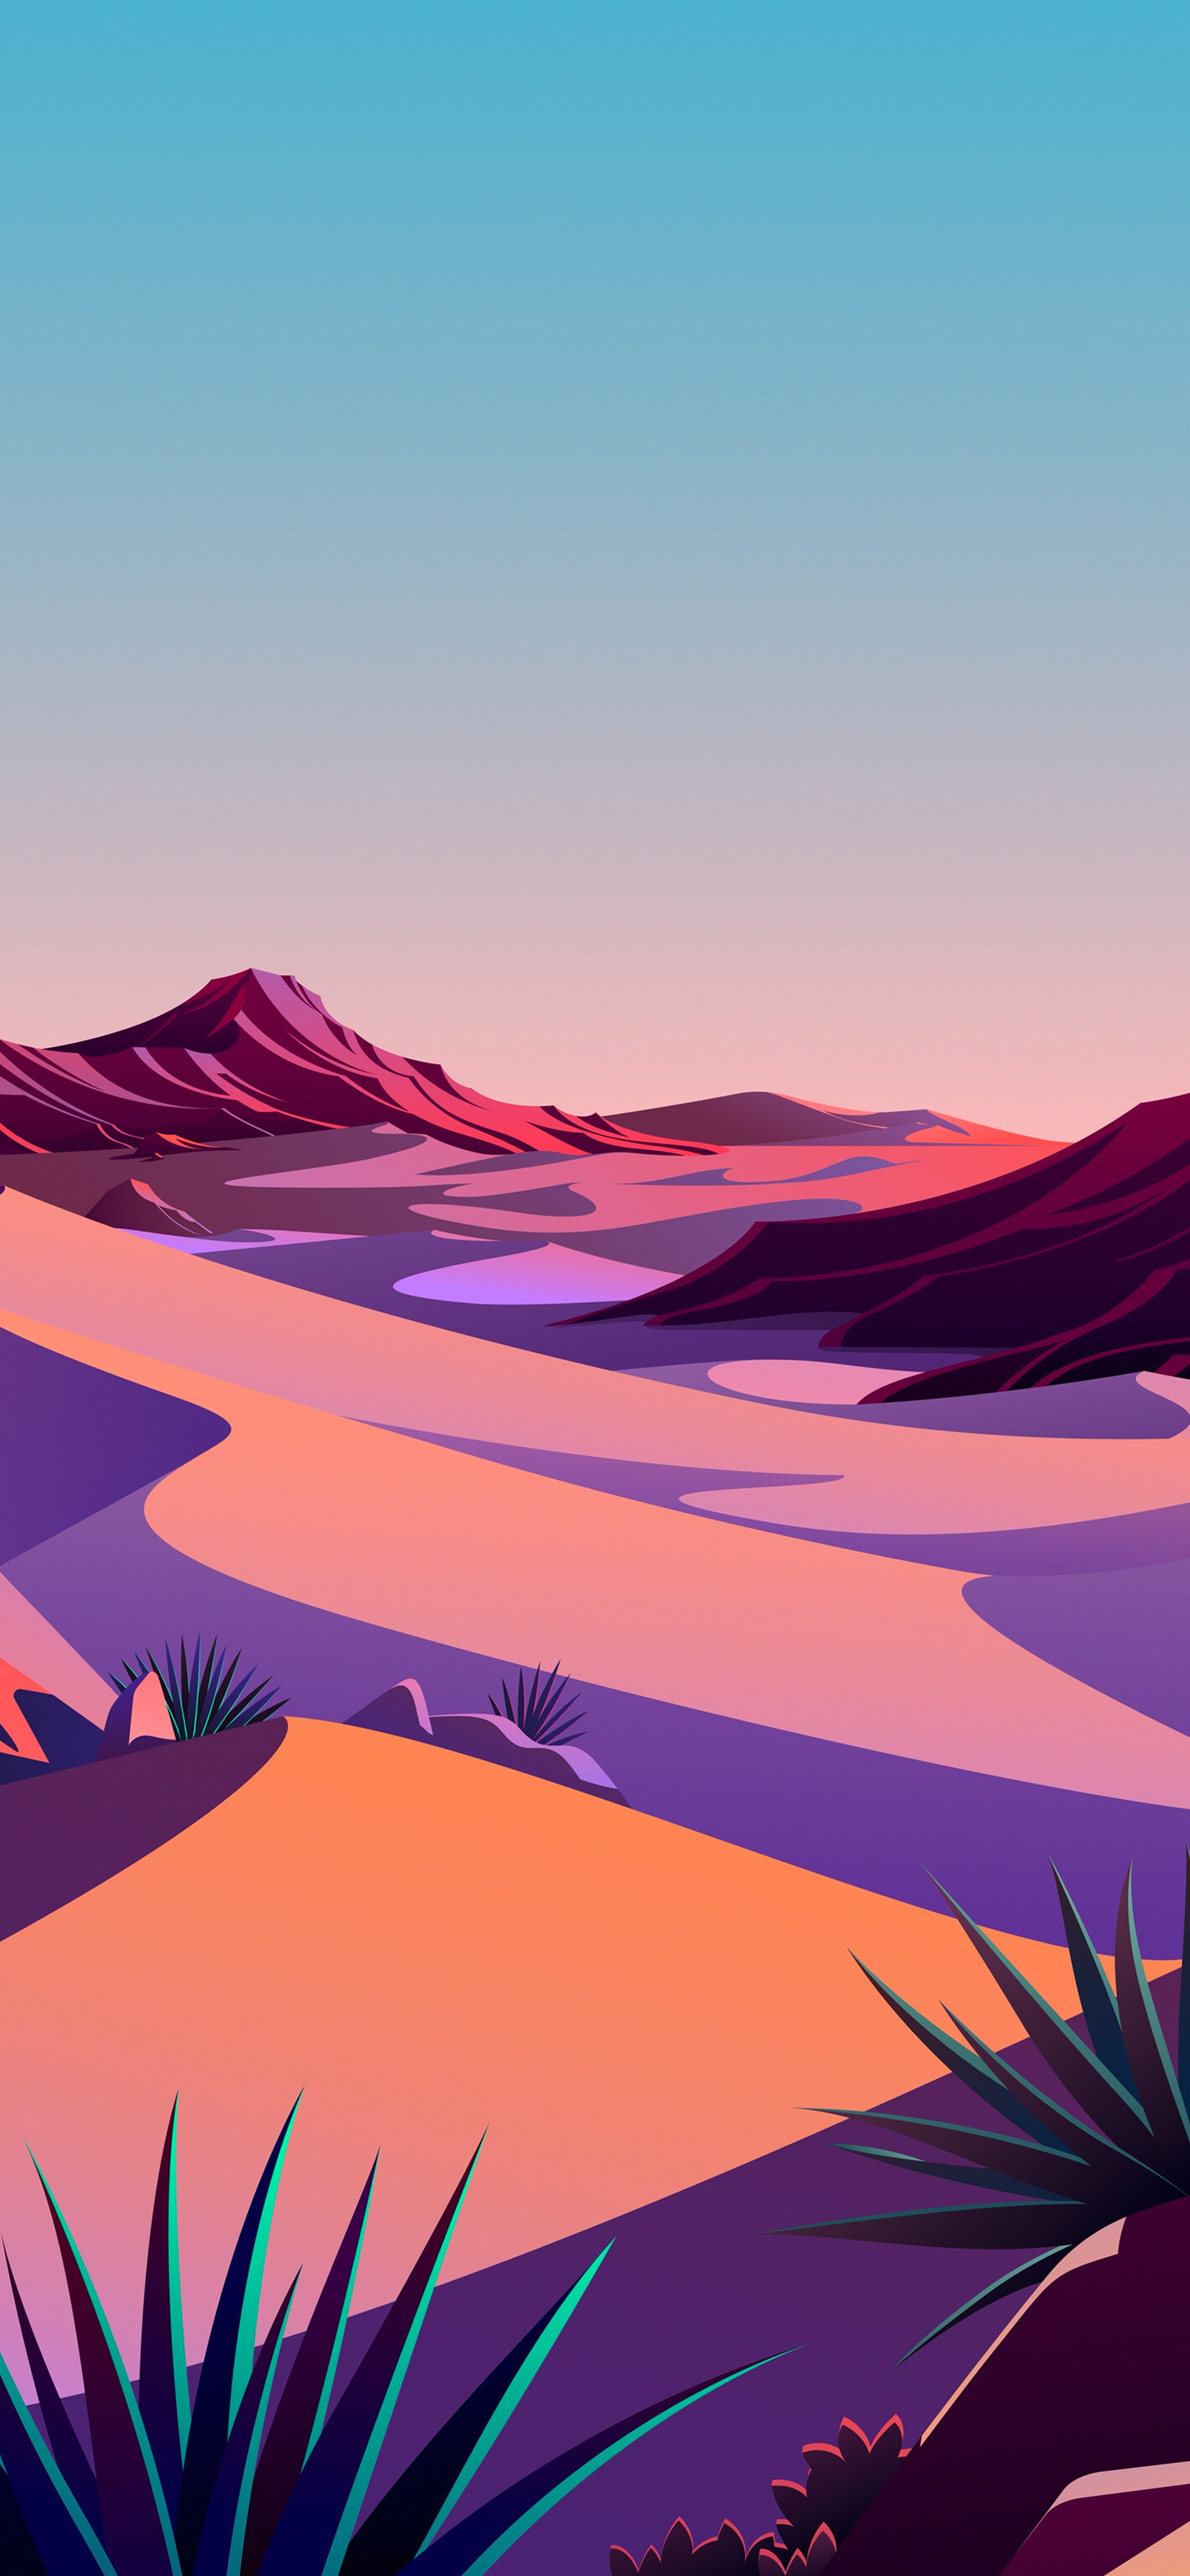 Desert: Many trade routes have been forged across deserts, especially across the Sahara, and traditionally were used by caravans of camels carrying salt, gold, ivory, and other goods, Illustration. 1420x3080 HD Wallpaper.